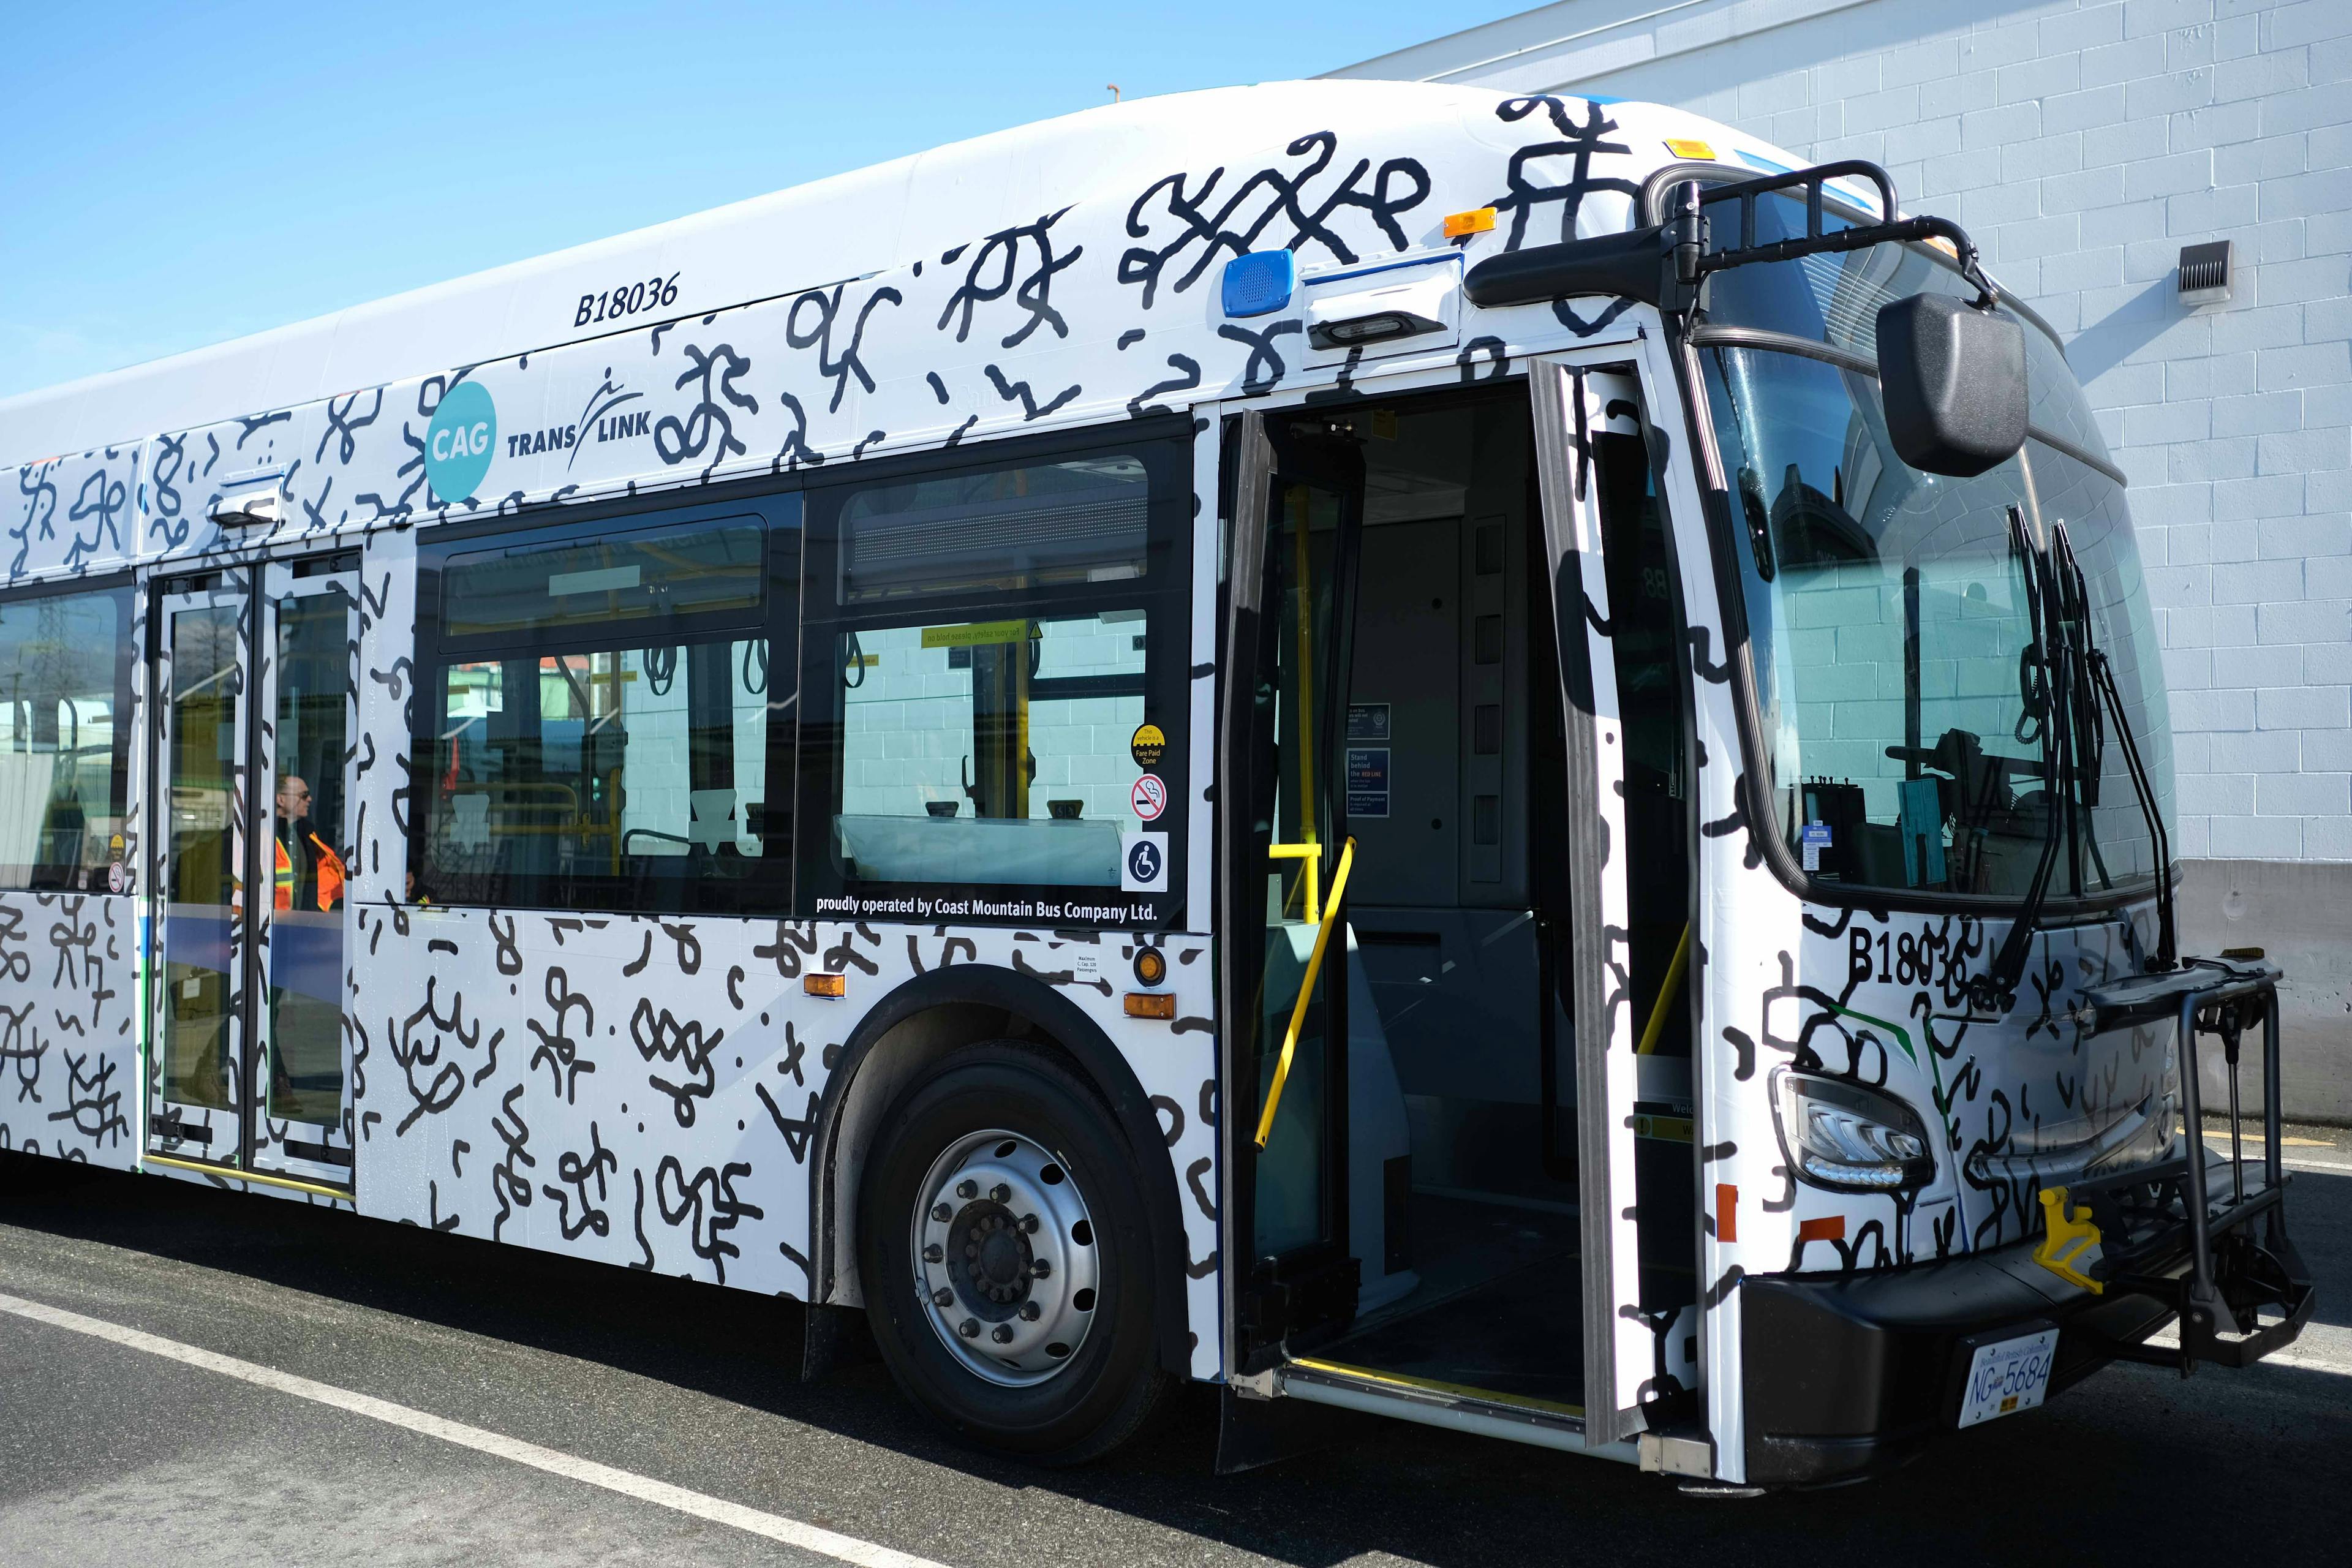 An image of the exterior of a transit bus that is wrapped in a patterned vinyl. The vinyl pattern is made up black pictographic imagery on a white background. 